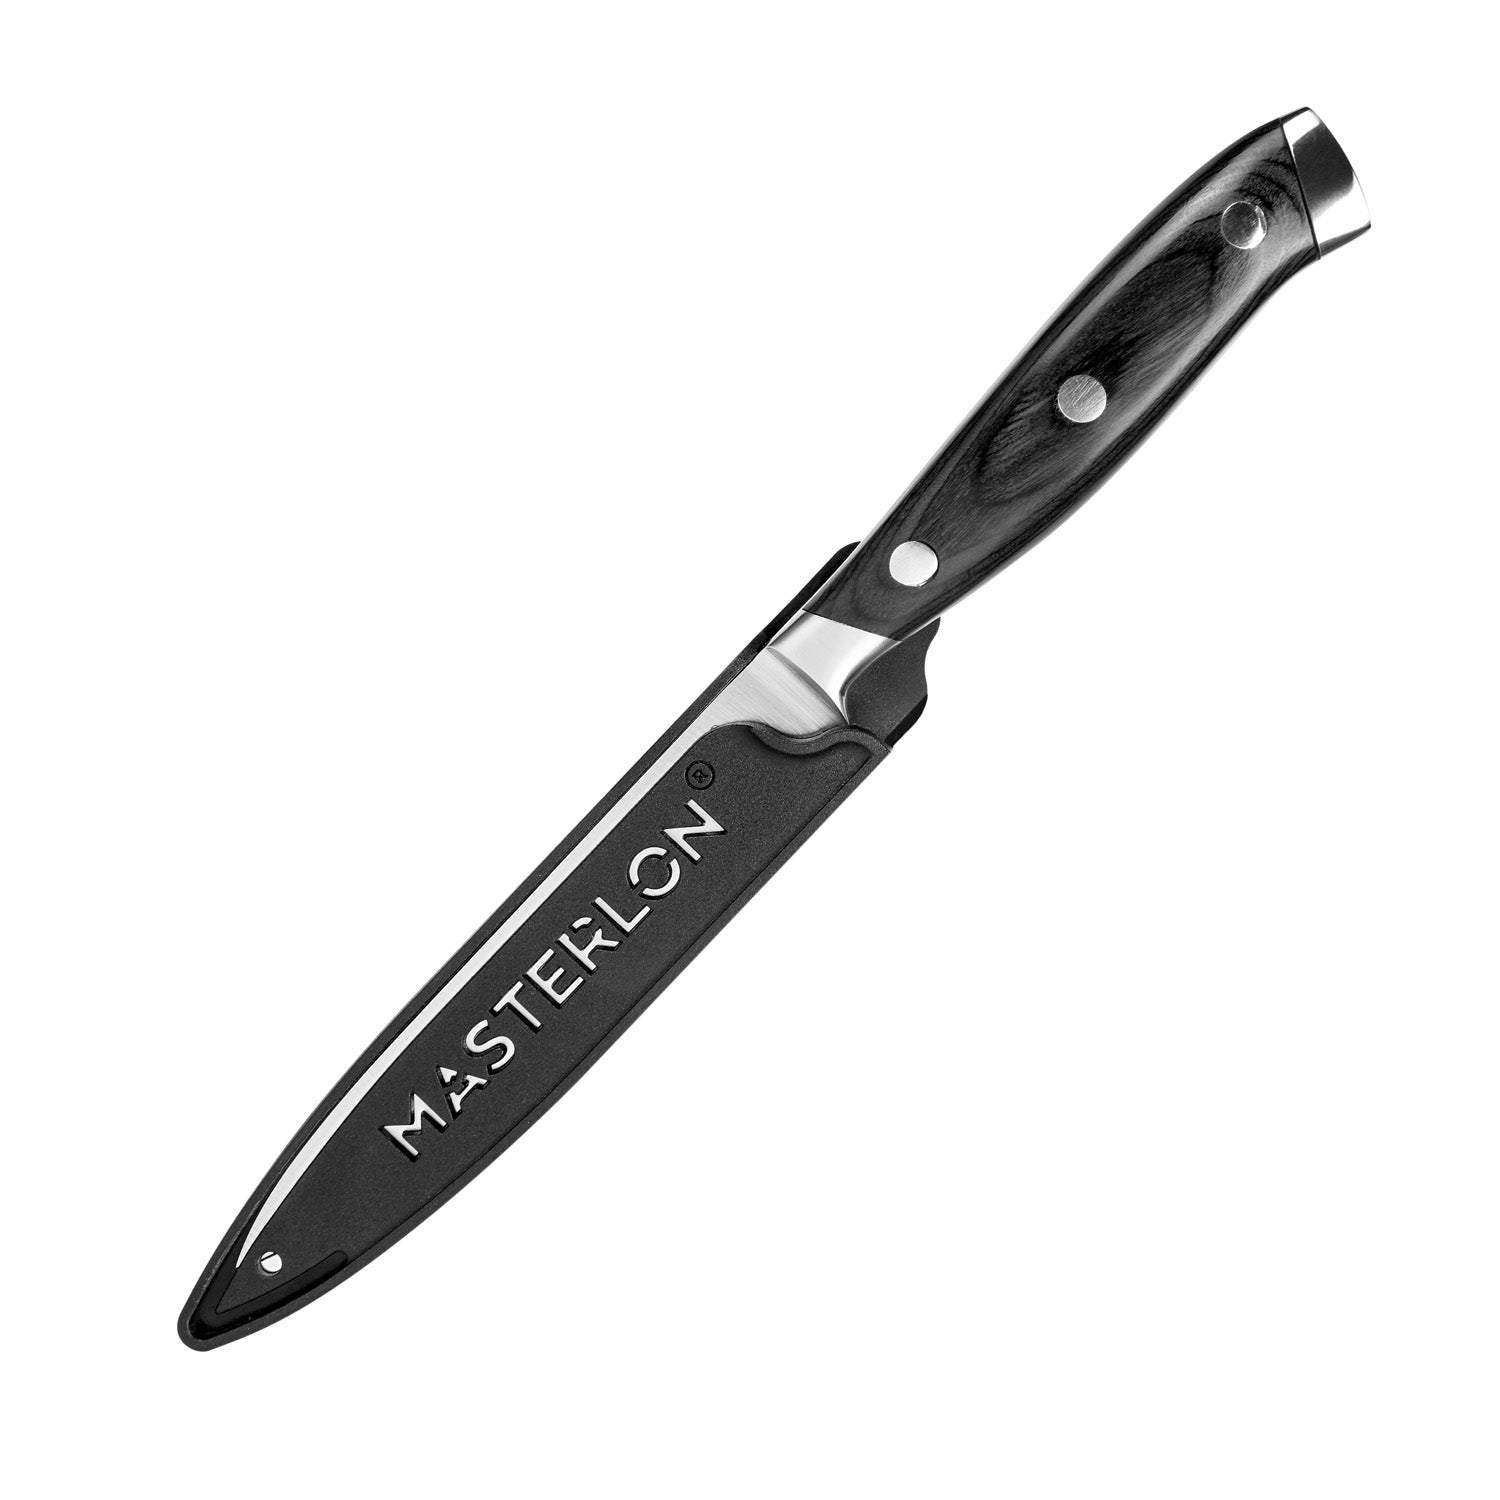 UTILITY KNIFE STAINLESS STEEL BLADE TRIPLE RIVET COLLECTION, 5